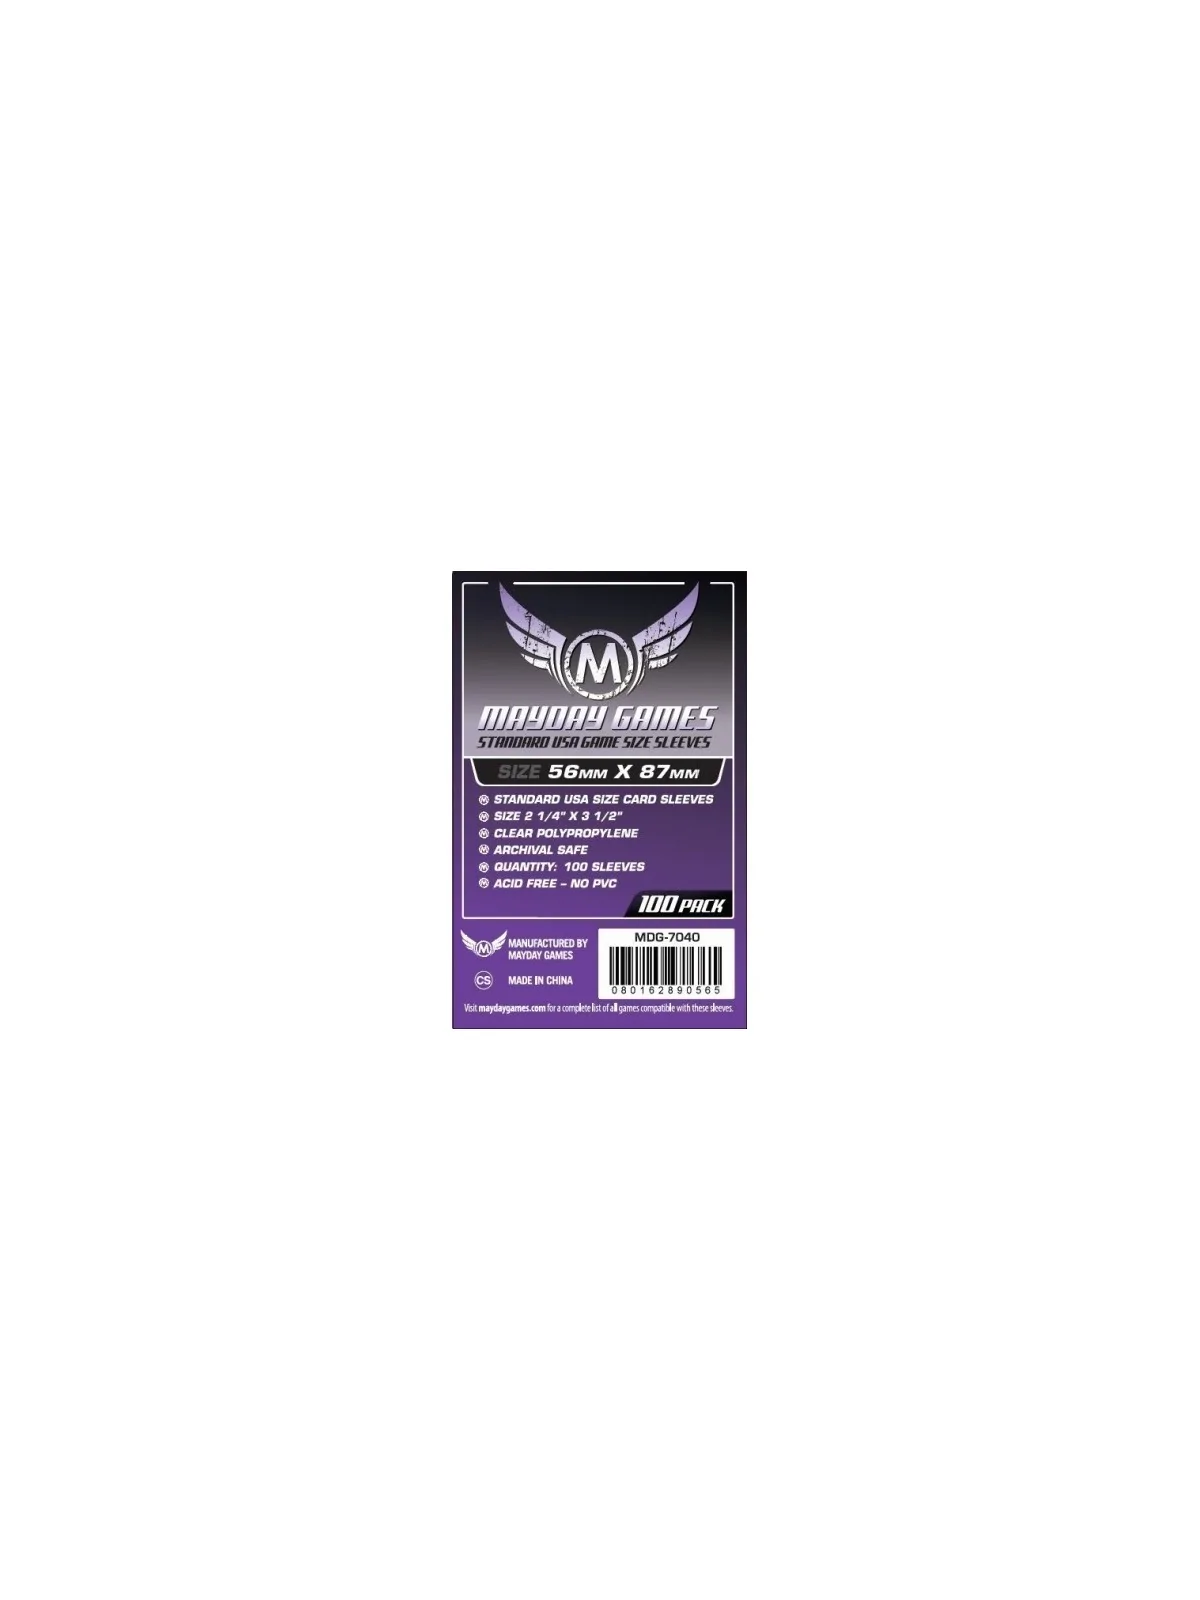 Comprar [7040] Mayday Games Standard USA Game Size Sleeves Purple (Pac